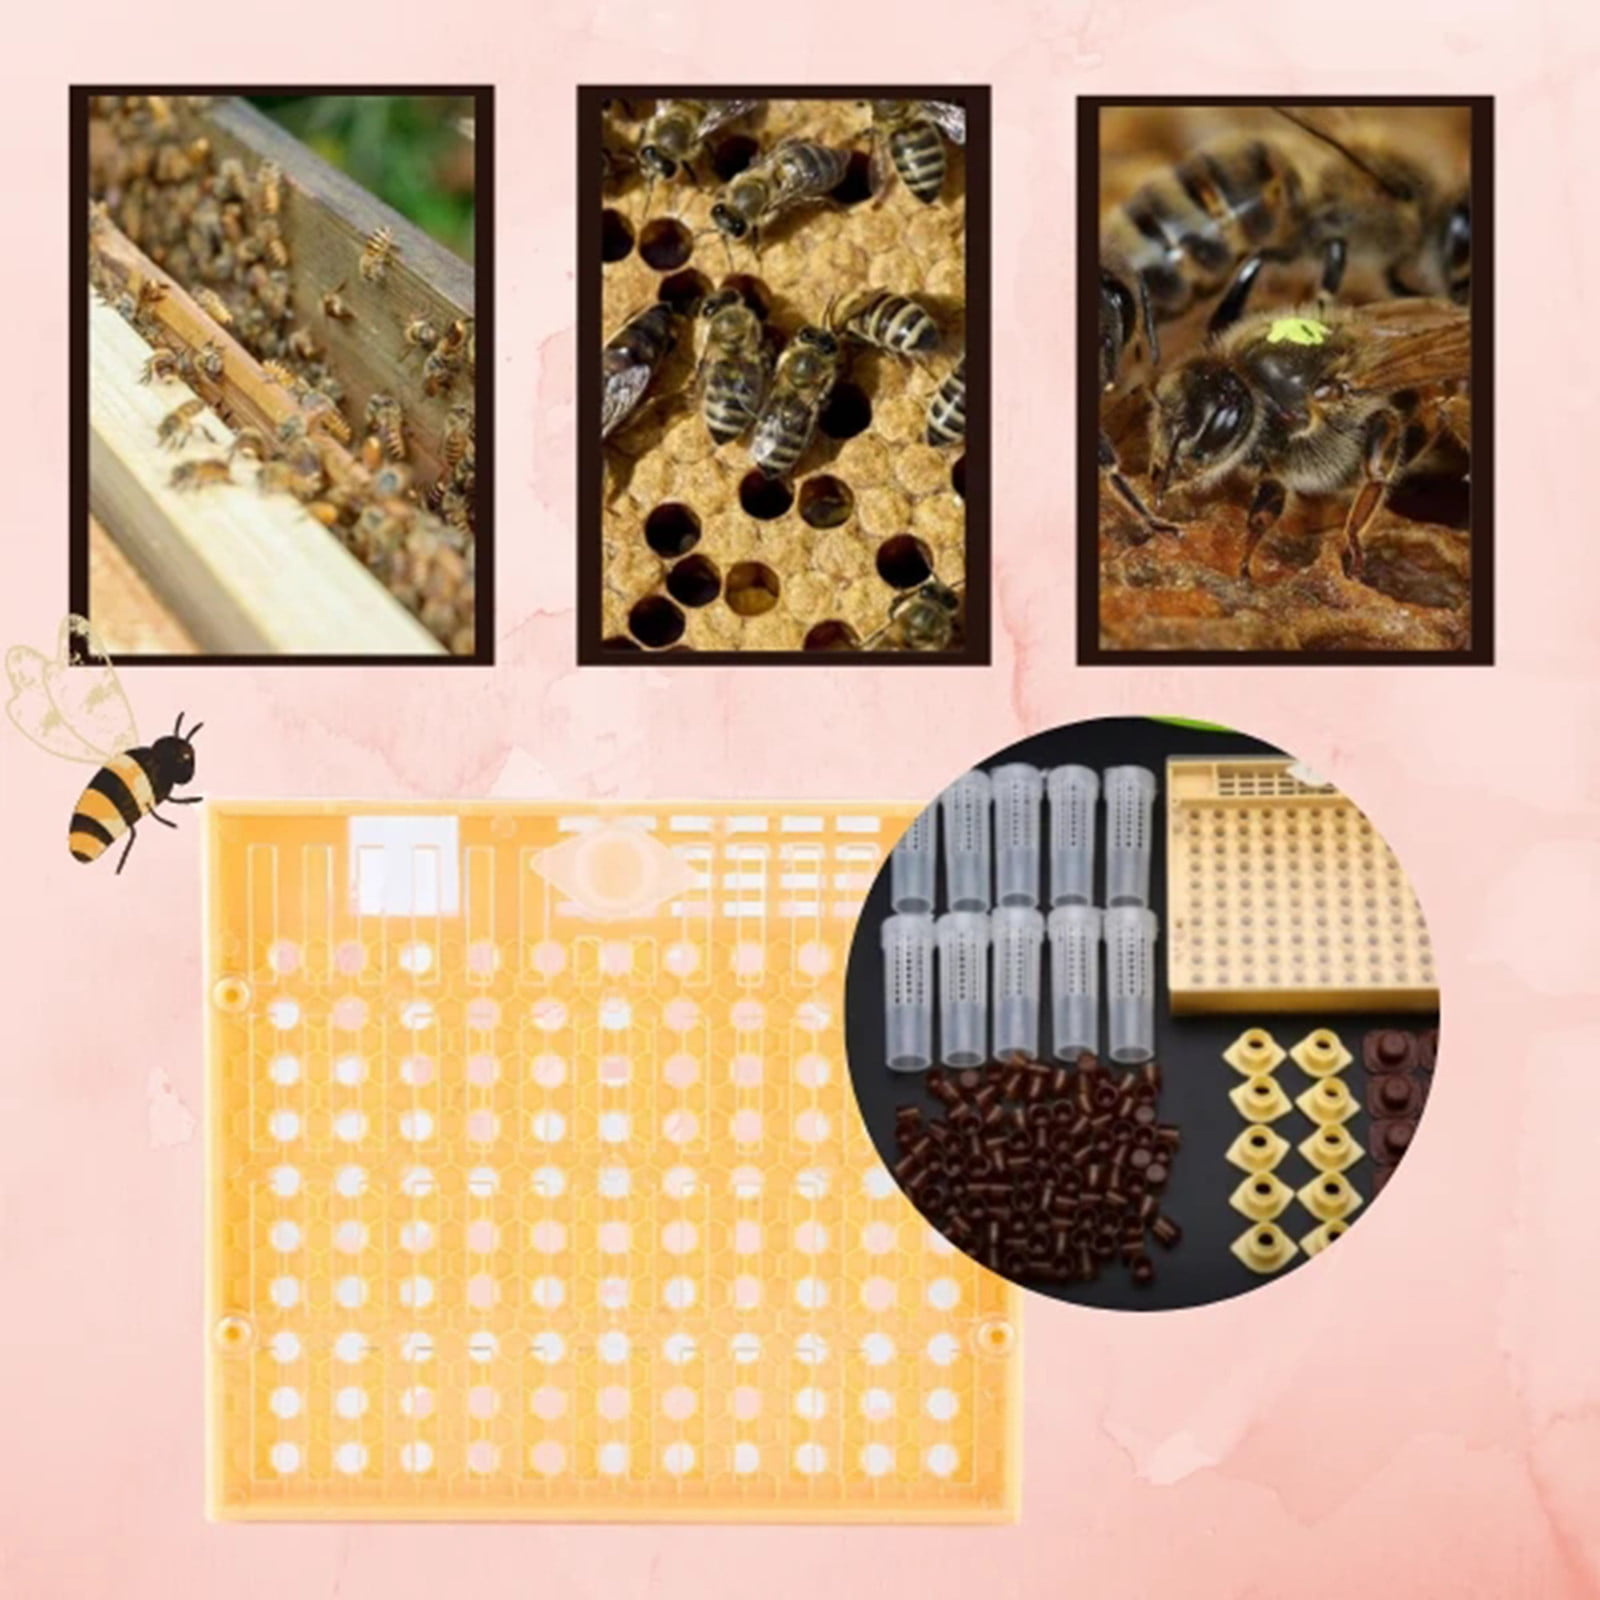 131pcs Bee Queen Rearing Cupkit Box System Beekeeping Cage Cell Cup Kit 